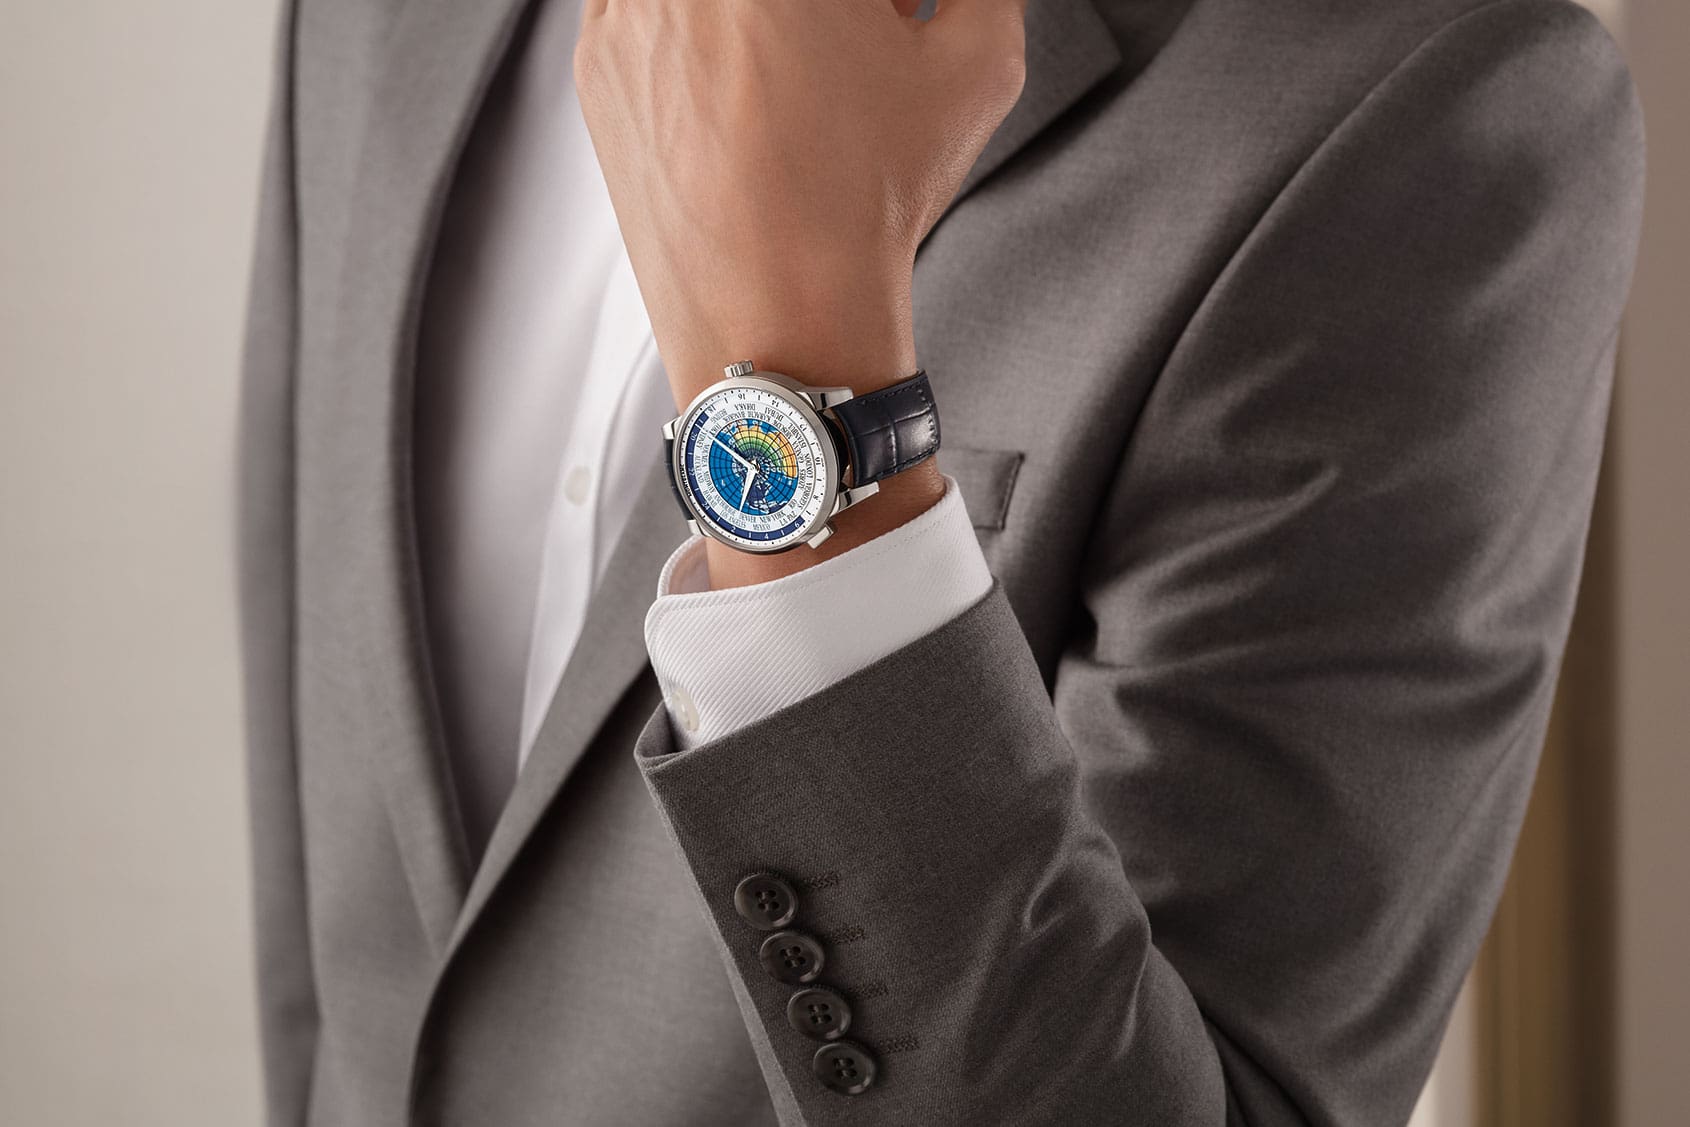 INTRODUCING: Looks good, does good – the Montblanc UNICEF Orbis Terrarum Limited Edition